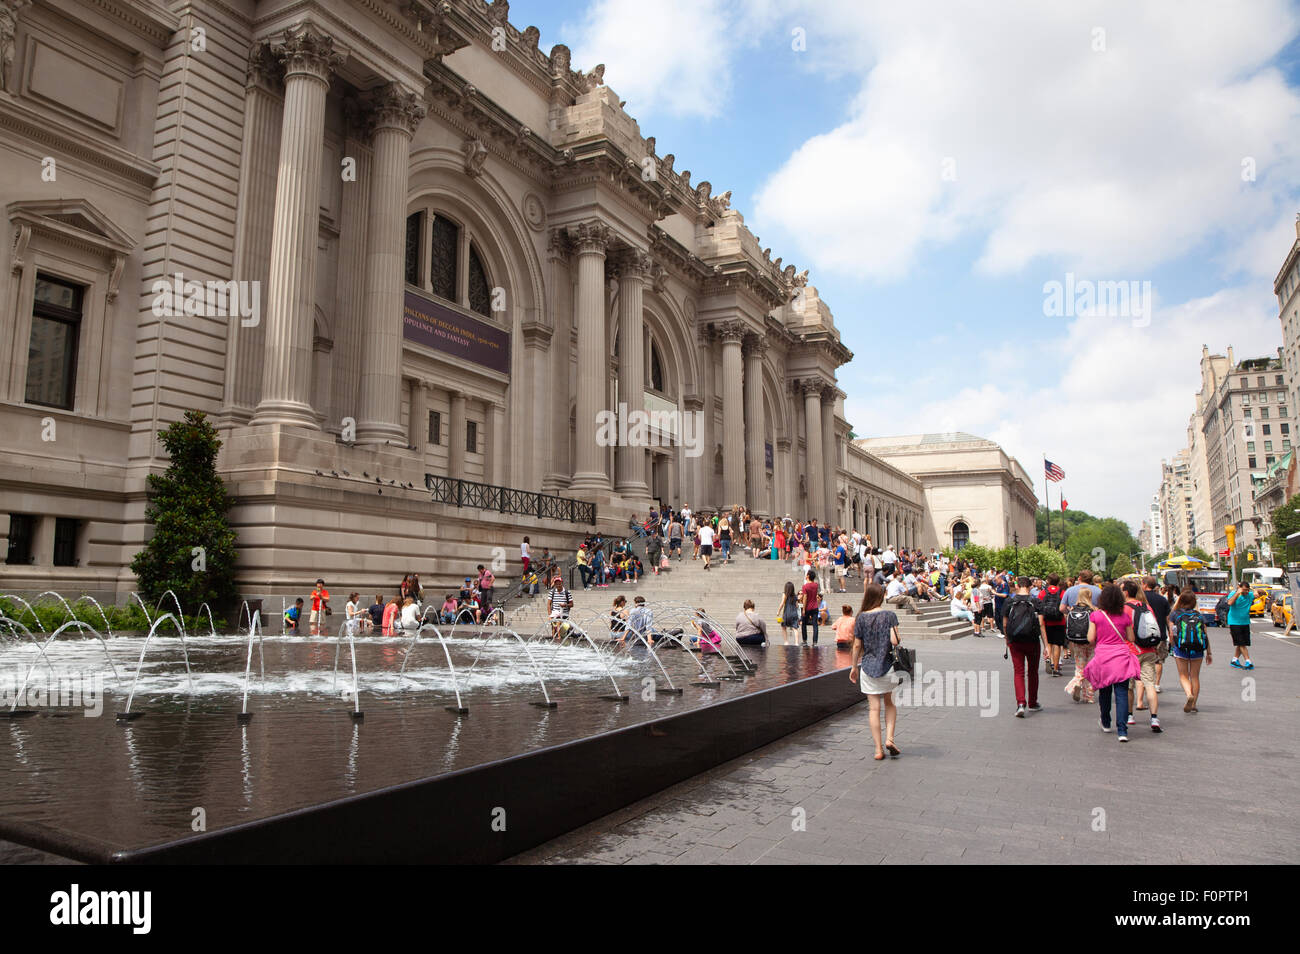 USA, New York State, New York City, Manhattan, Exterior of the Museum of Modern Art on 5th Avenue. Stock Photo